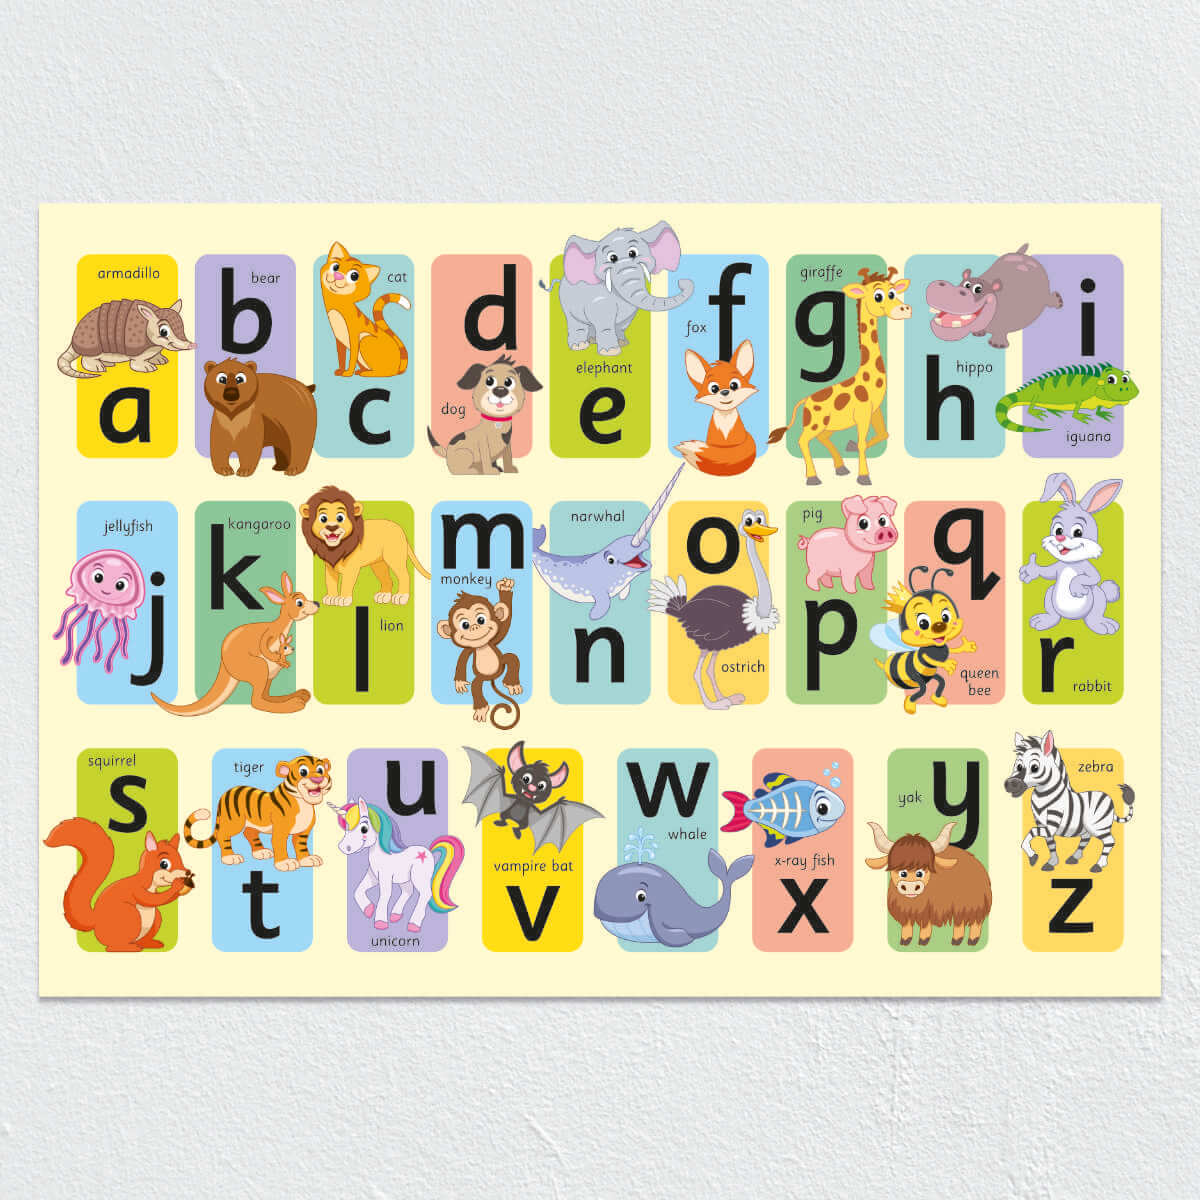 Alphabet Poster Beautifully Illustrated English Phonics Poster For